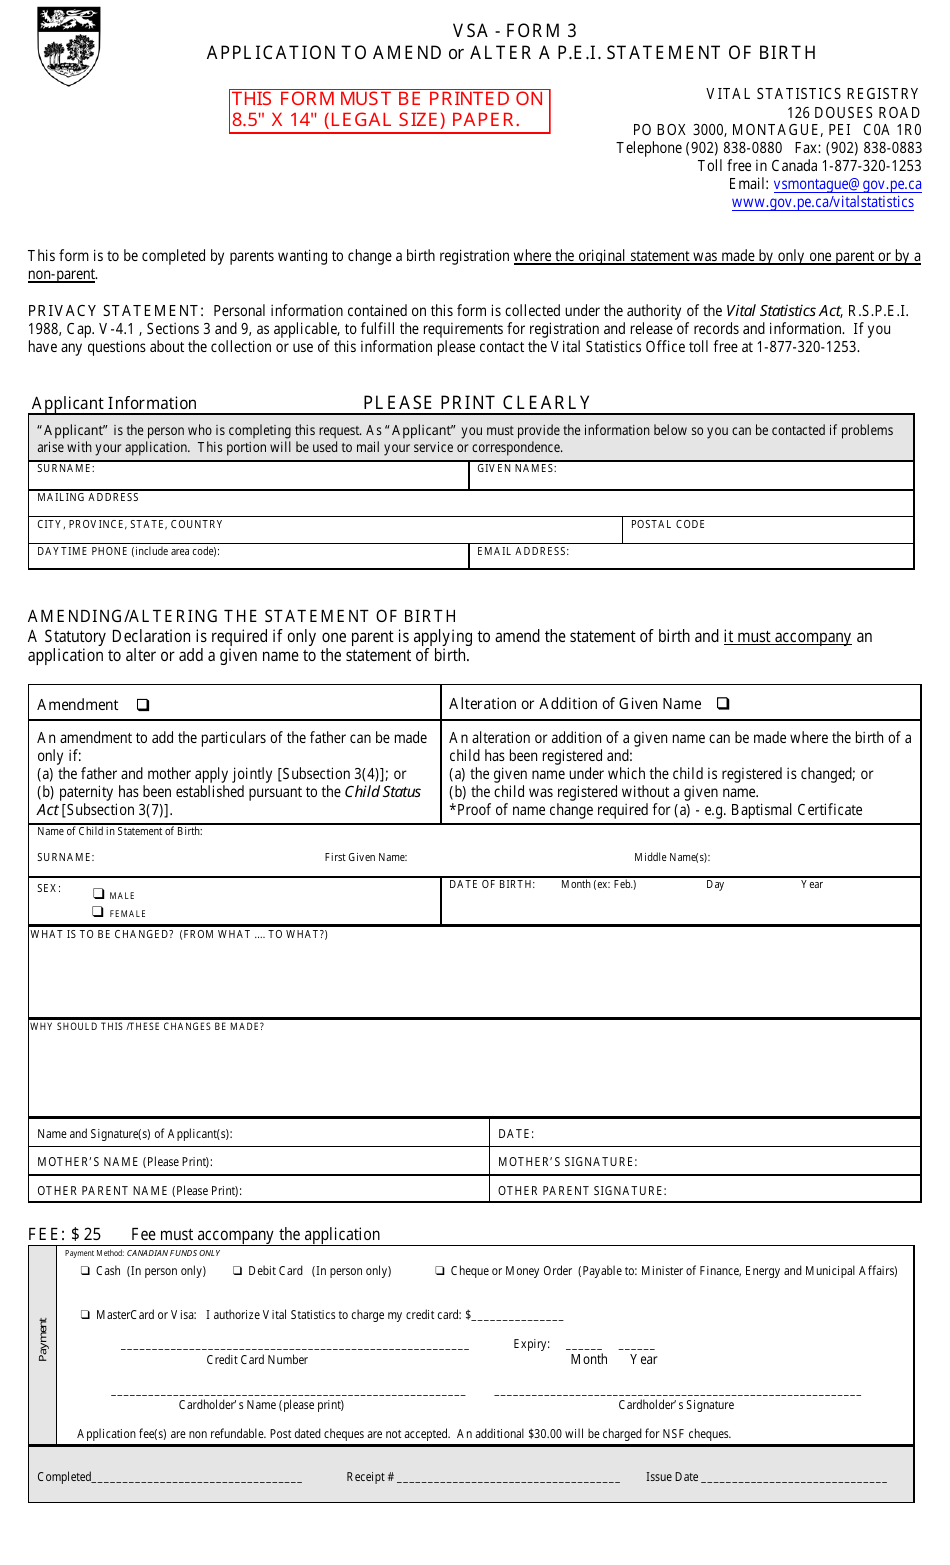 VSA Form 3 Application to Amend or Alter a P.e.i. Statement of Birth - Prince Edward Island, Canada, Page 1